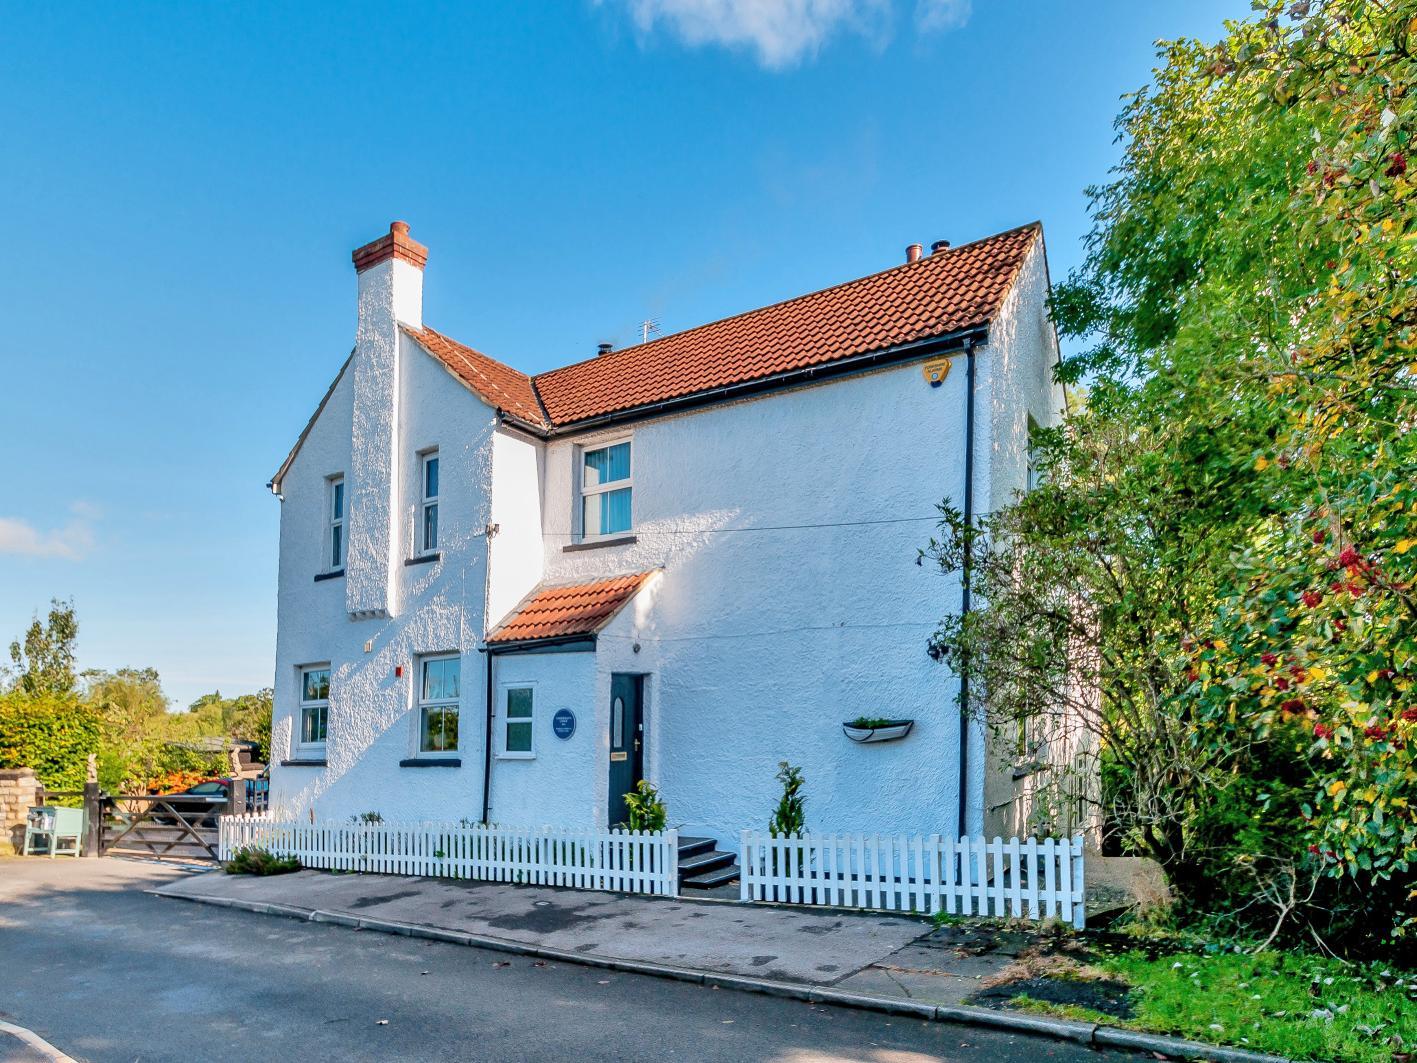 A charming 5 bedroom detached house providing generously proportioned and versatile accommodation, set beautifully in private gardens and grounds that run alongside the River Ure.